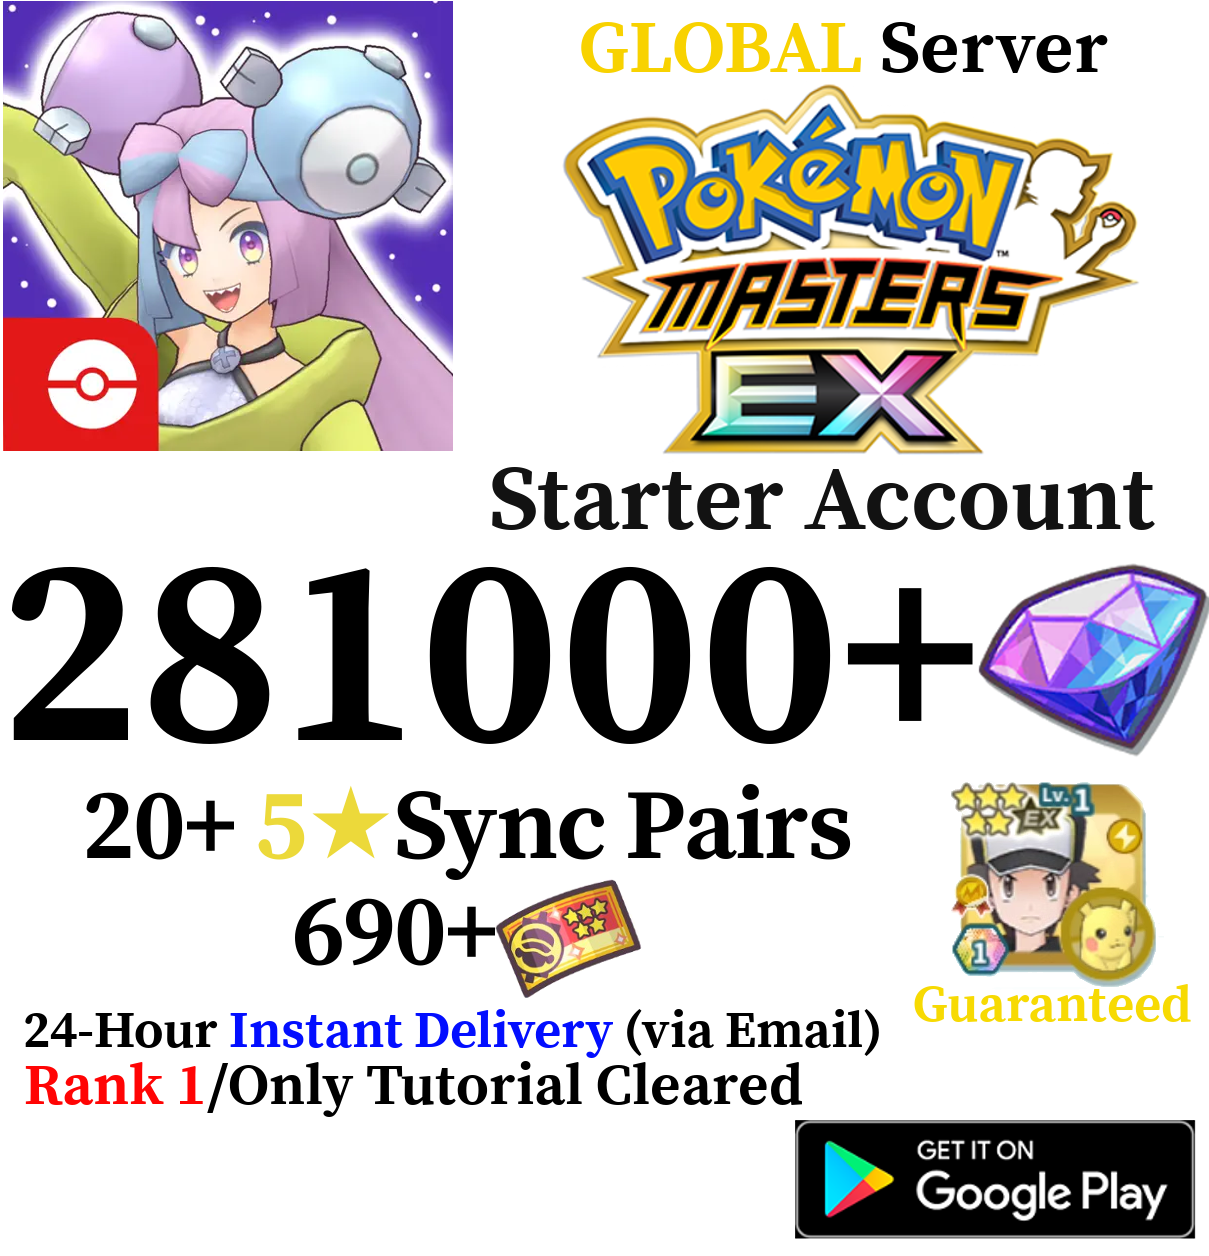 [GLOBAL] [INSTANT] 260,000-281,000+ Gems | Pokémon Pokemon Masters EX Starter Reroll Account (Android Required)